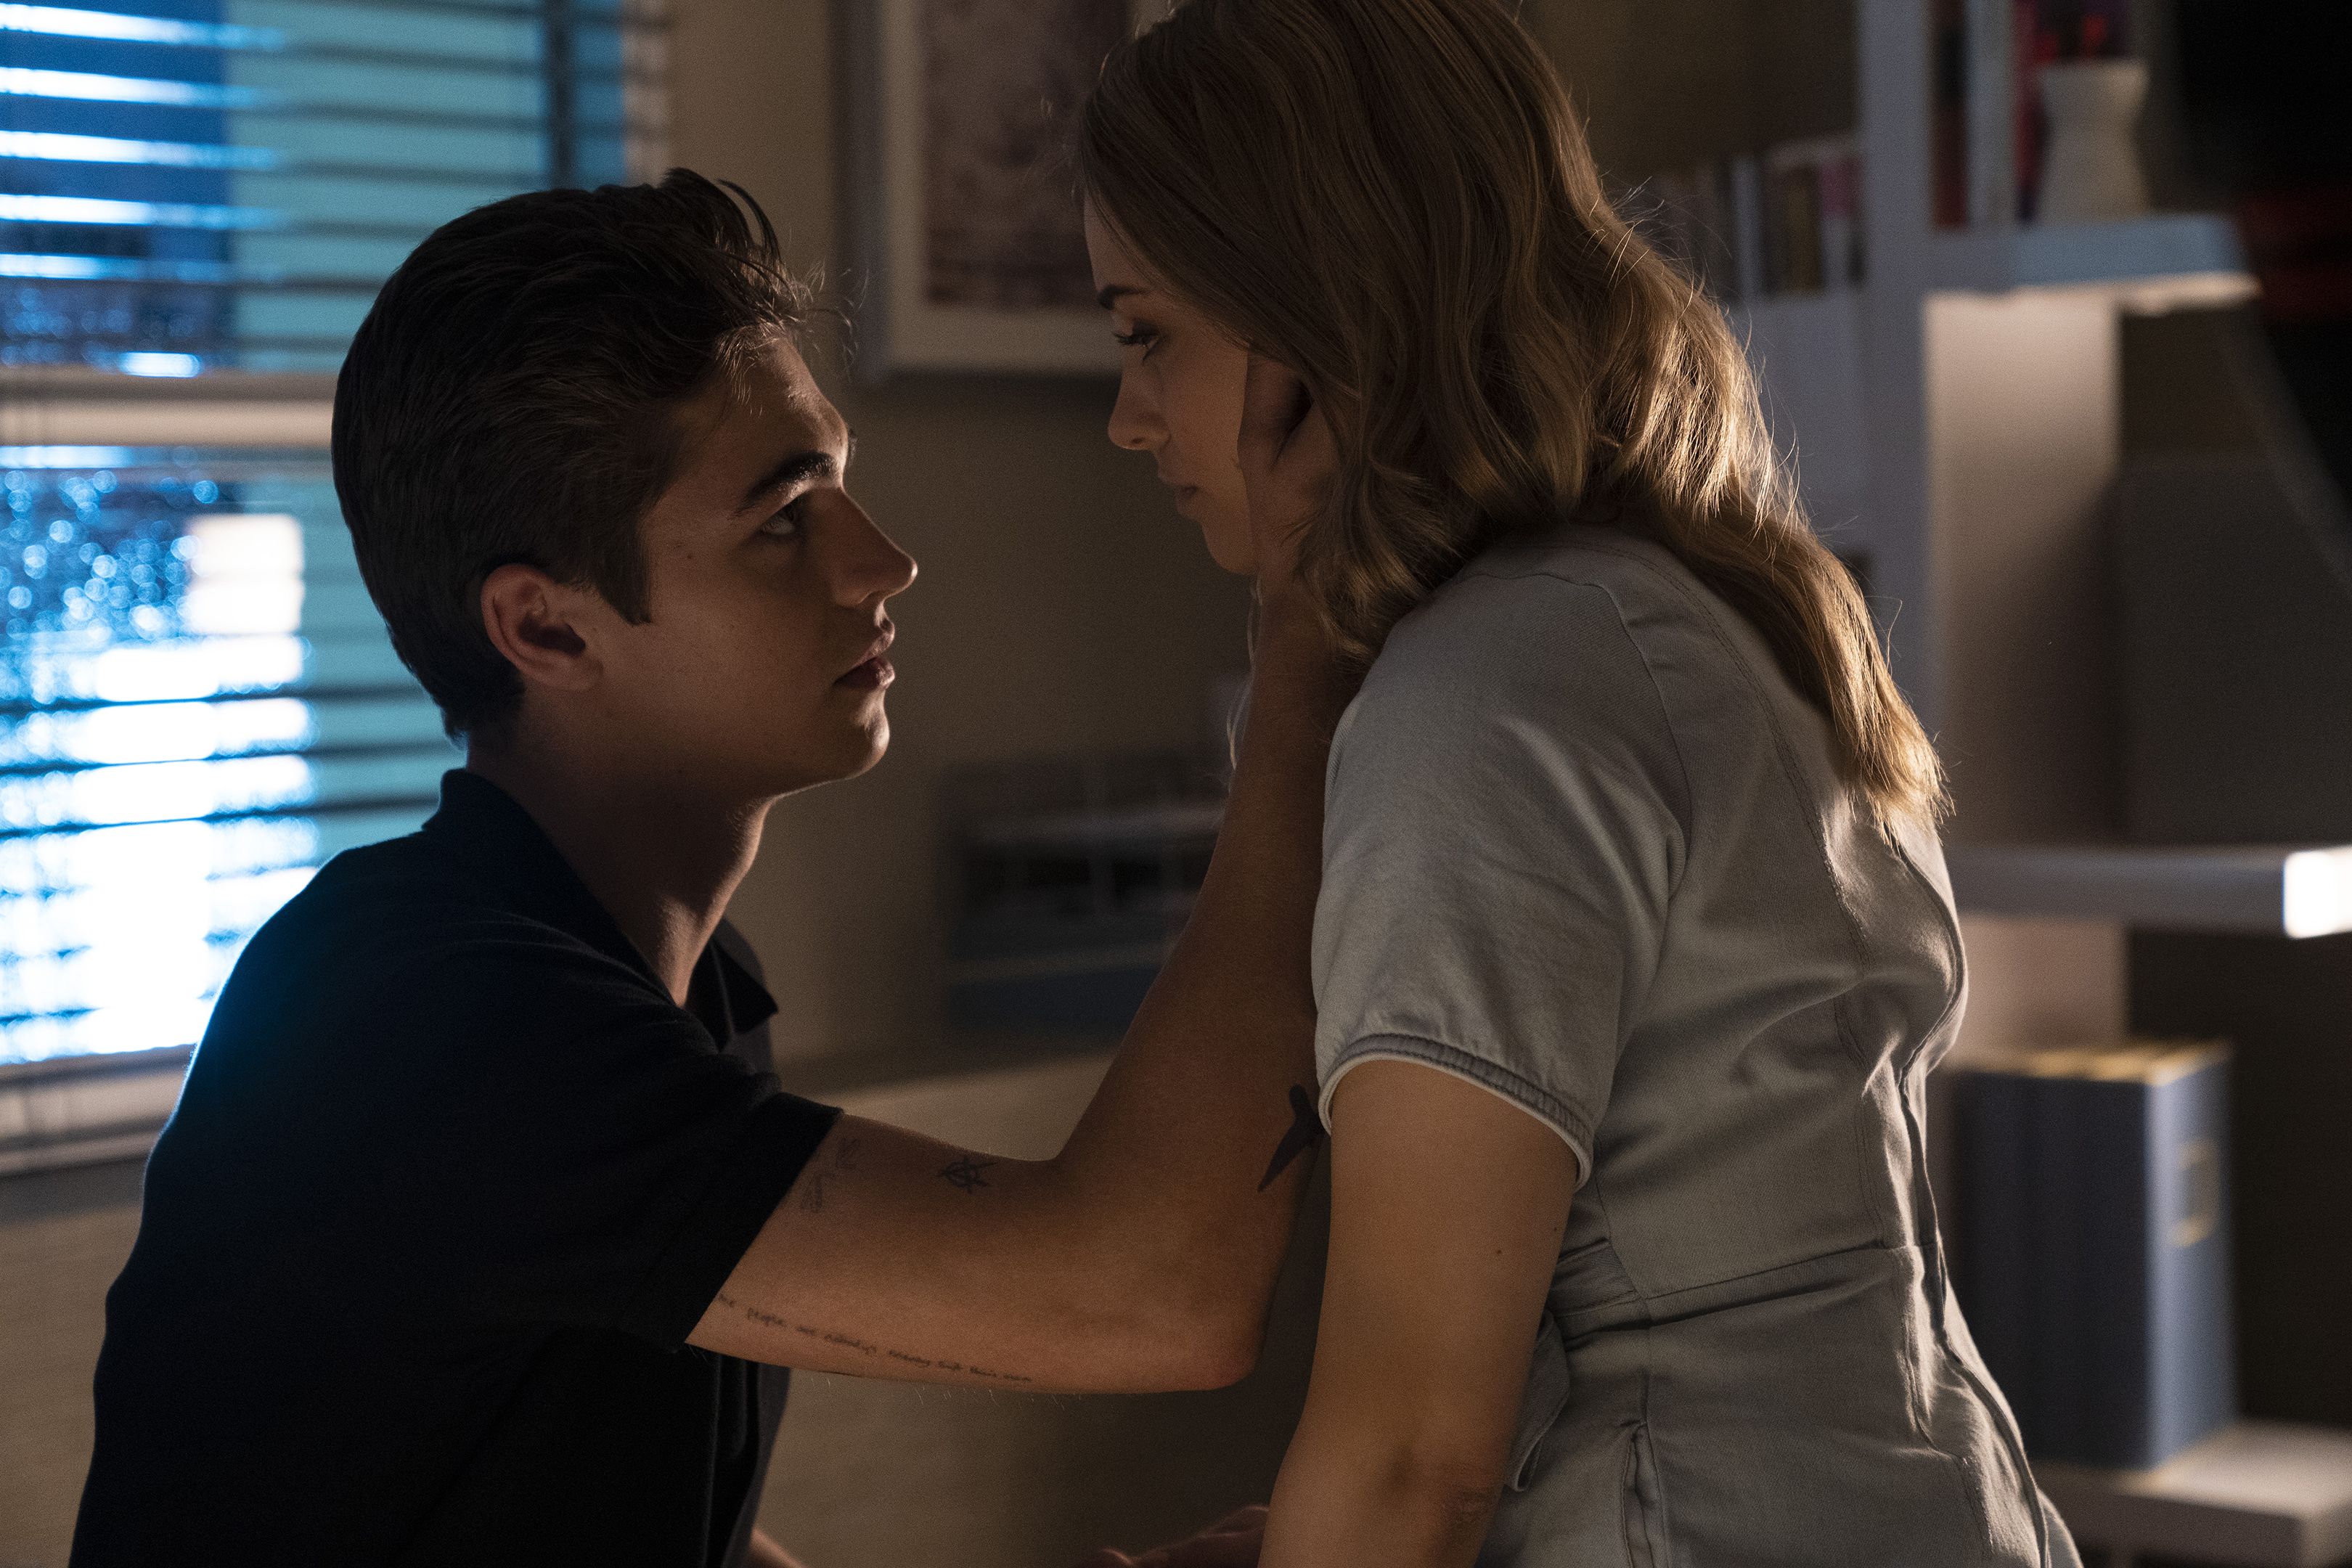  Josephine Langford y el héroe Fiennes Tiffin en "After We Collided" Finally Coming to the US